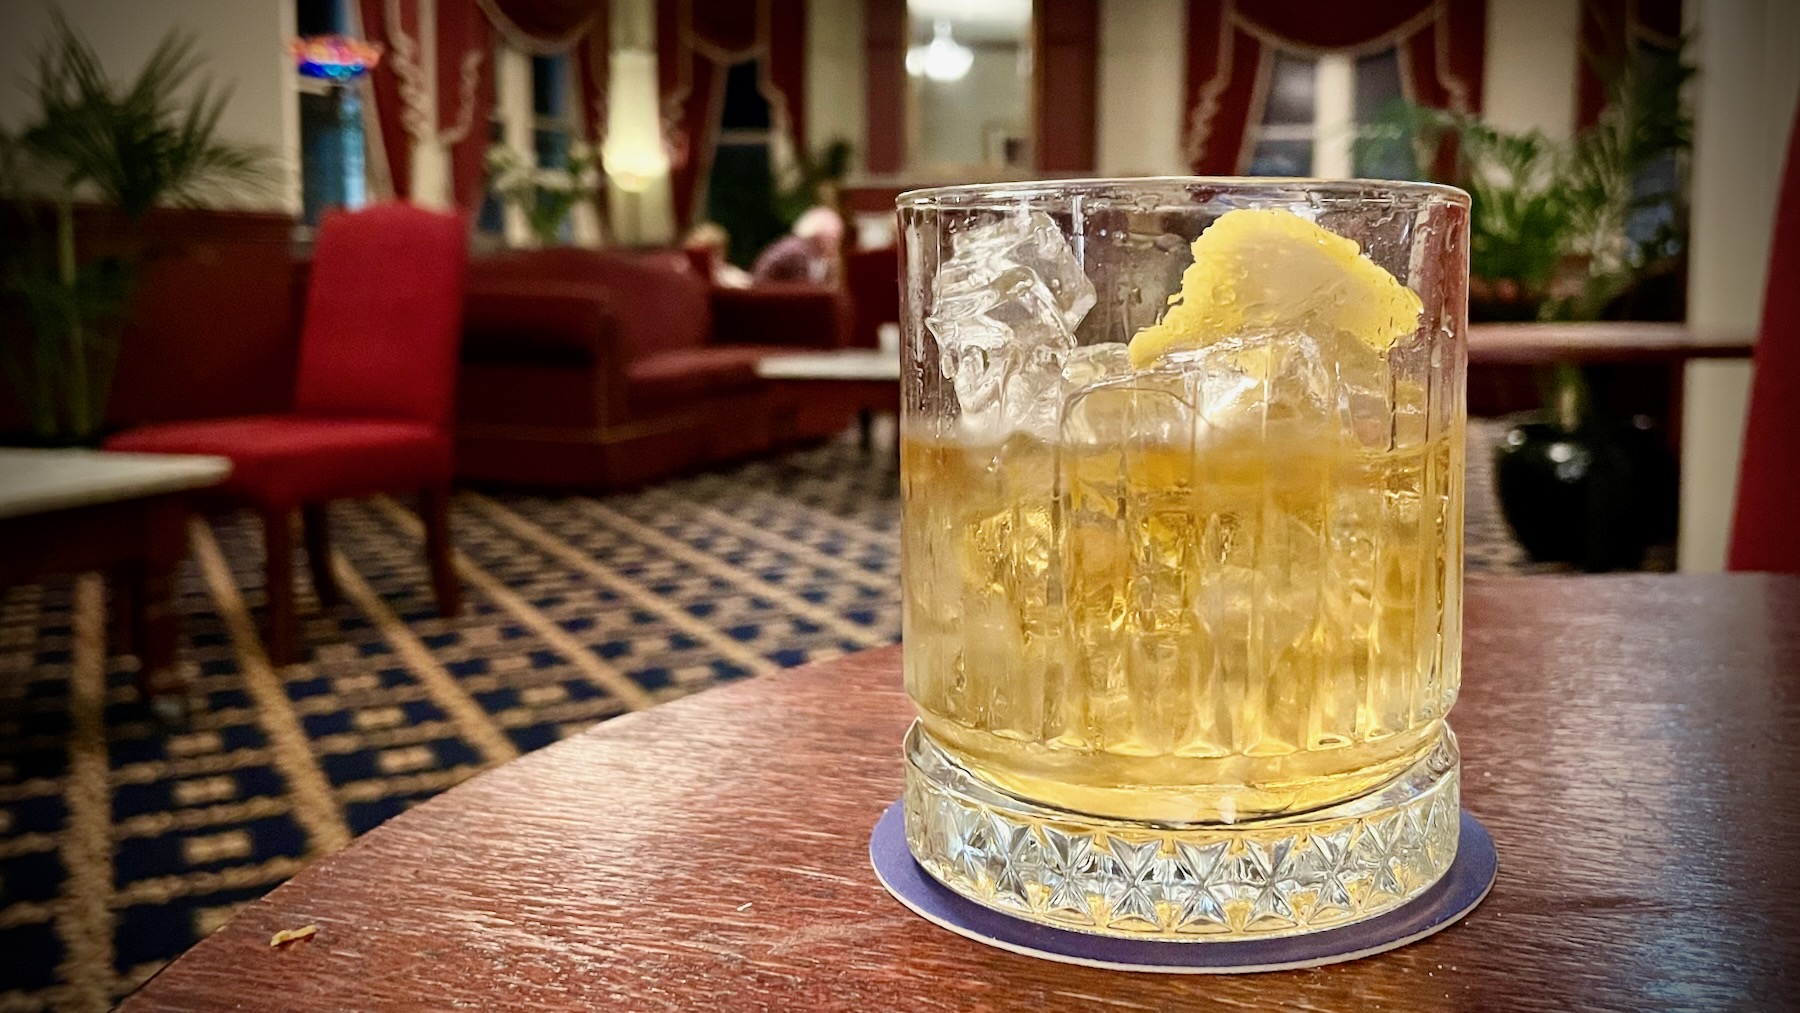 On an old wooden table sits an old-style lowball glass containing a pale yellow liquid, ice cubes, and slice of lemon. In the background, out of focus, the lush dark red furnishings of a high-Victorian drawing room.